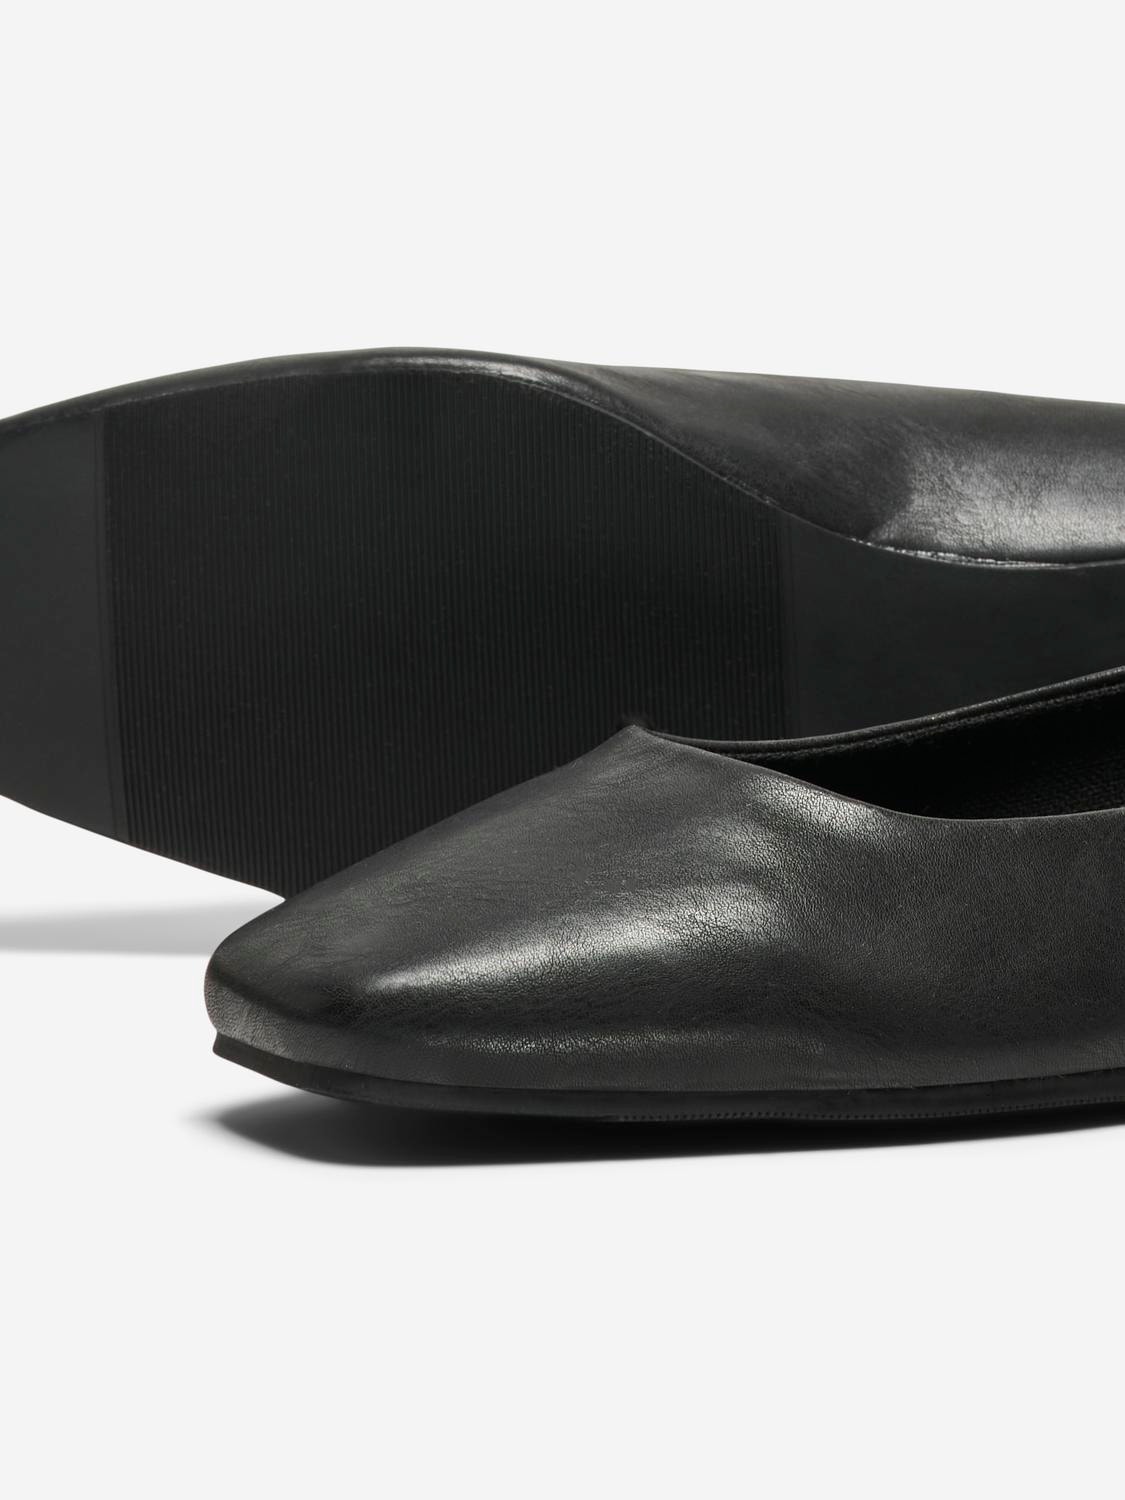 ONLY Faux leather ballerinas -Black - 15320198